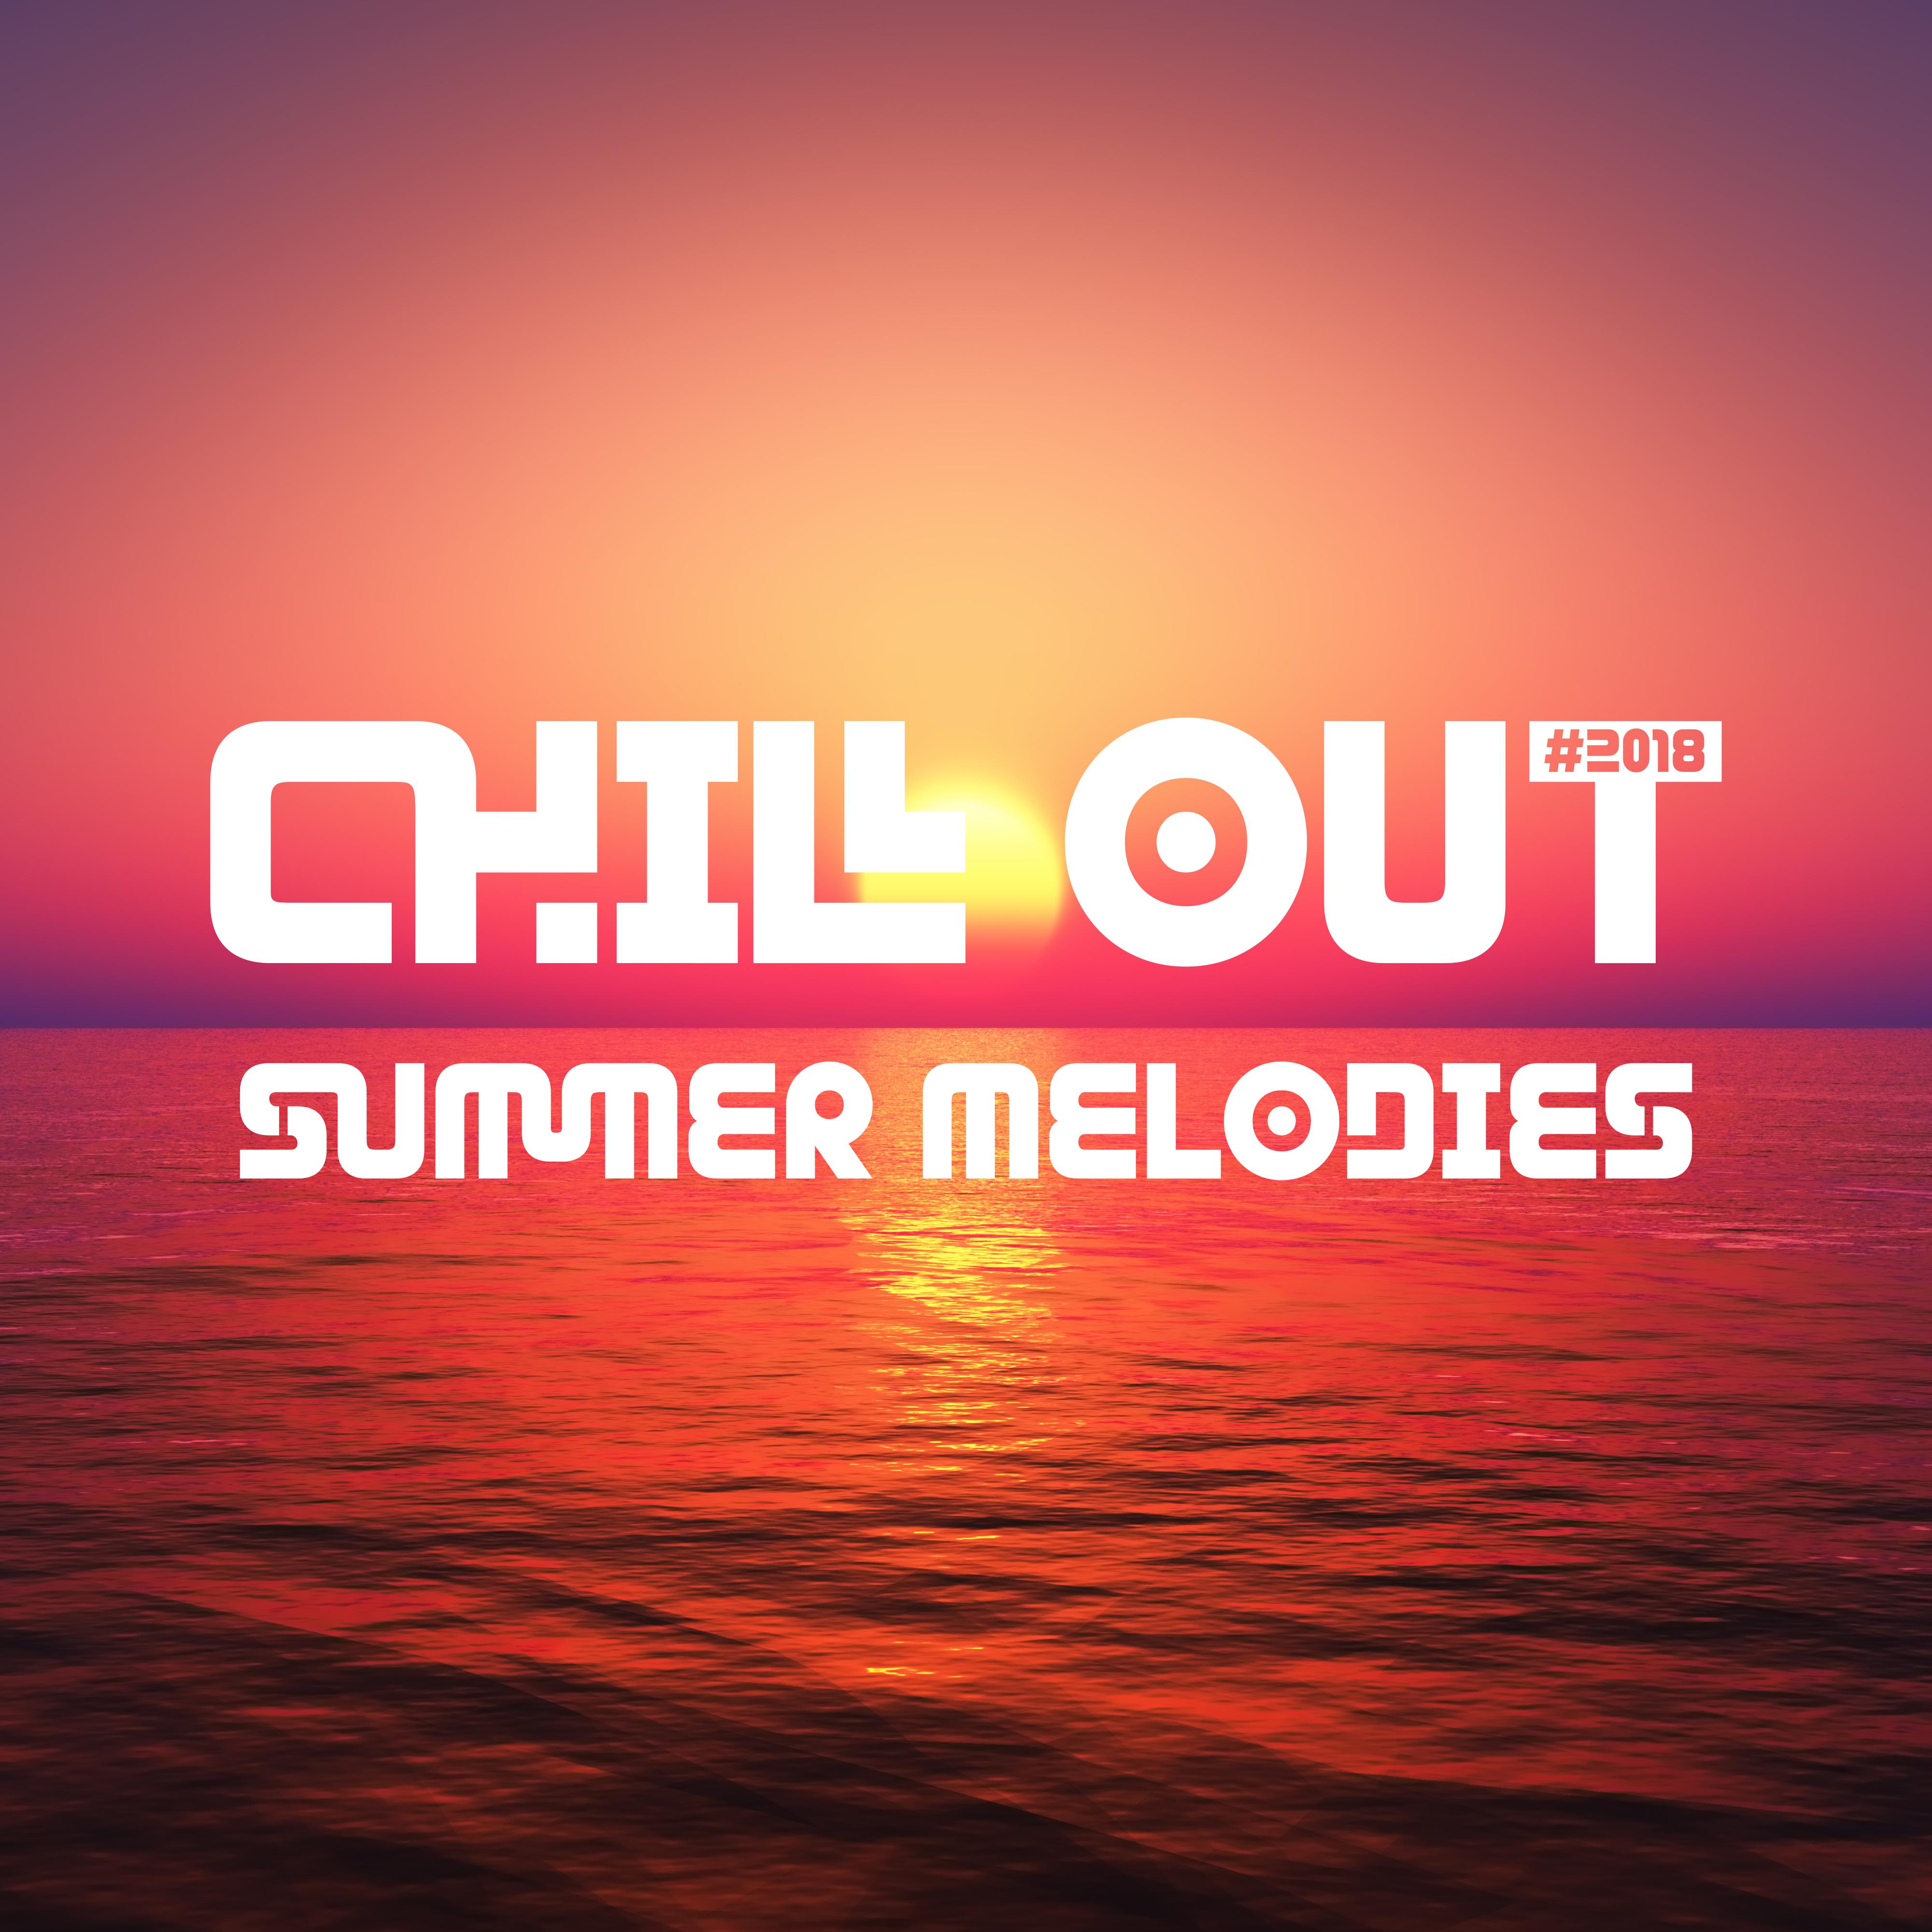 #2018 Chill Out Summer Melodies